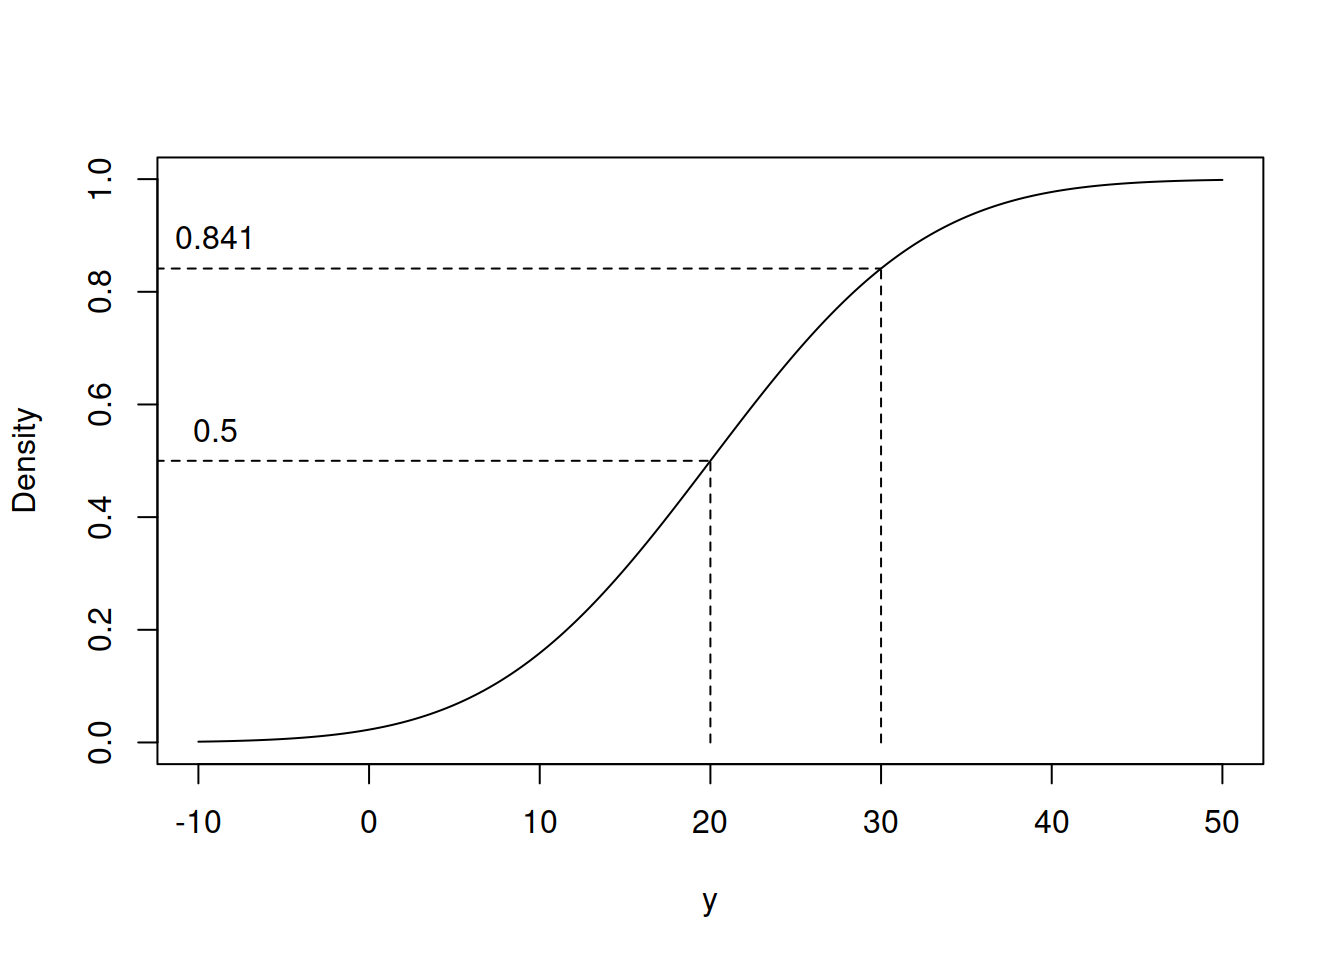 Values of CDF for the example with Normal distribution